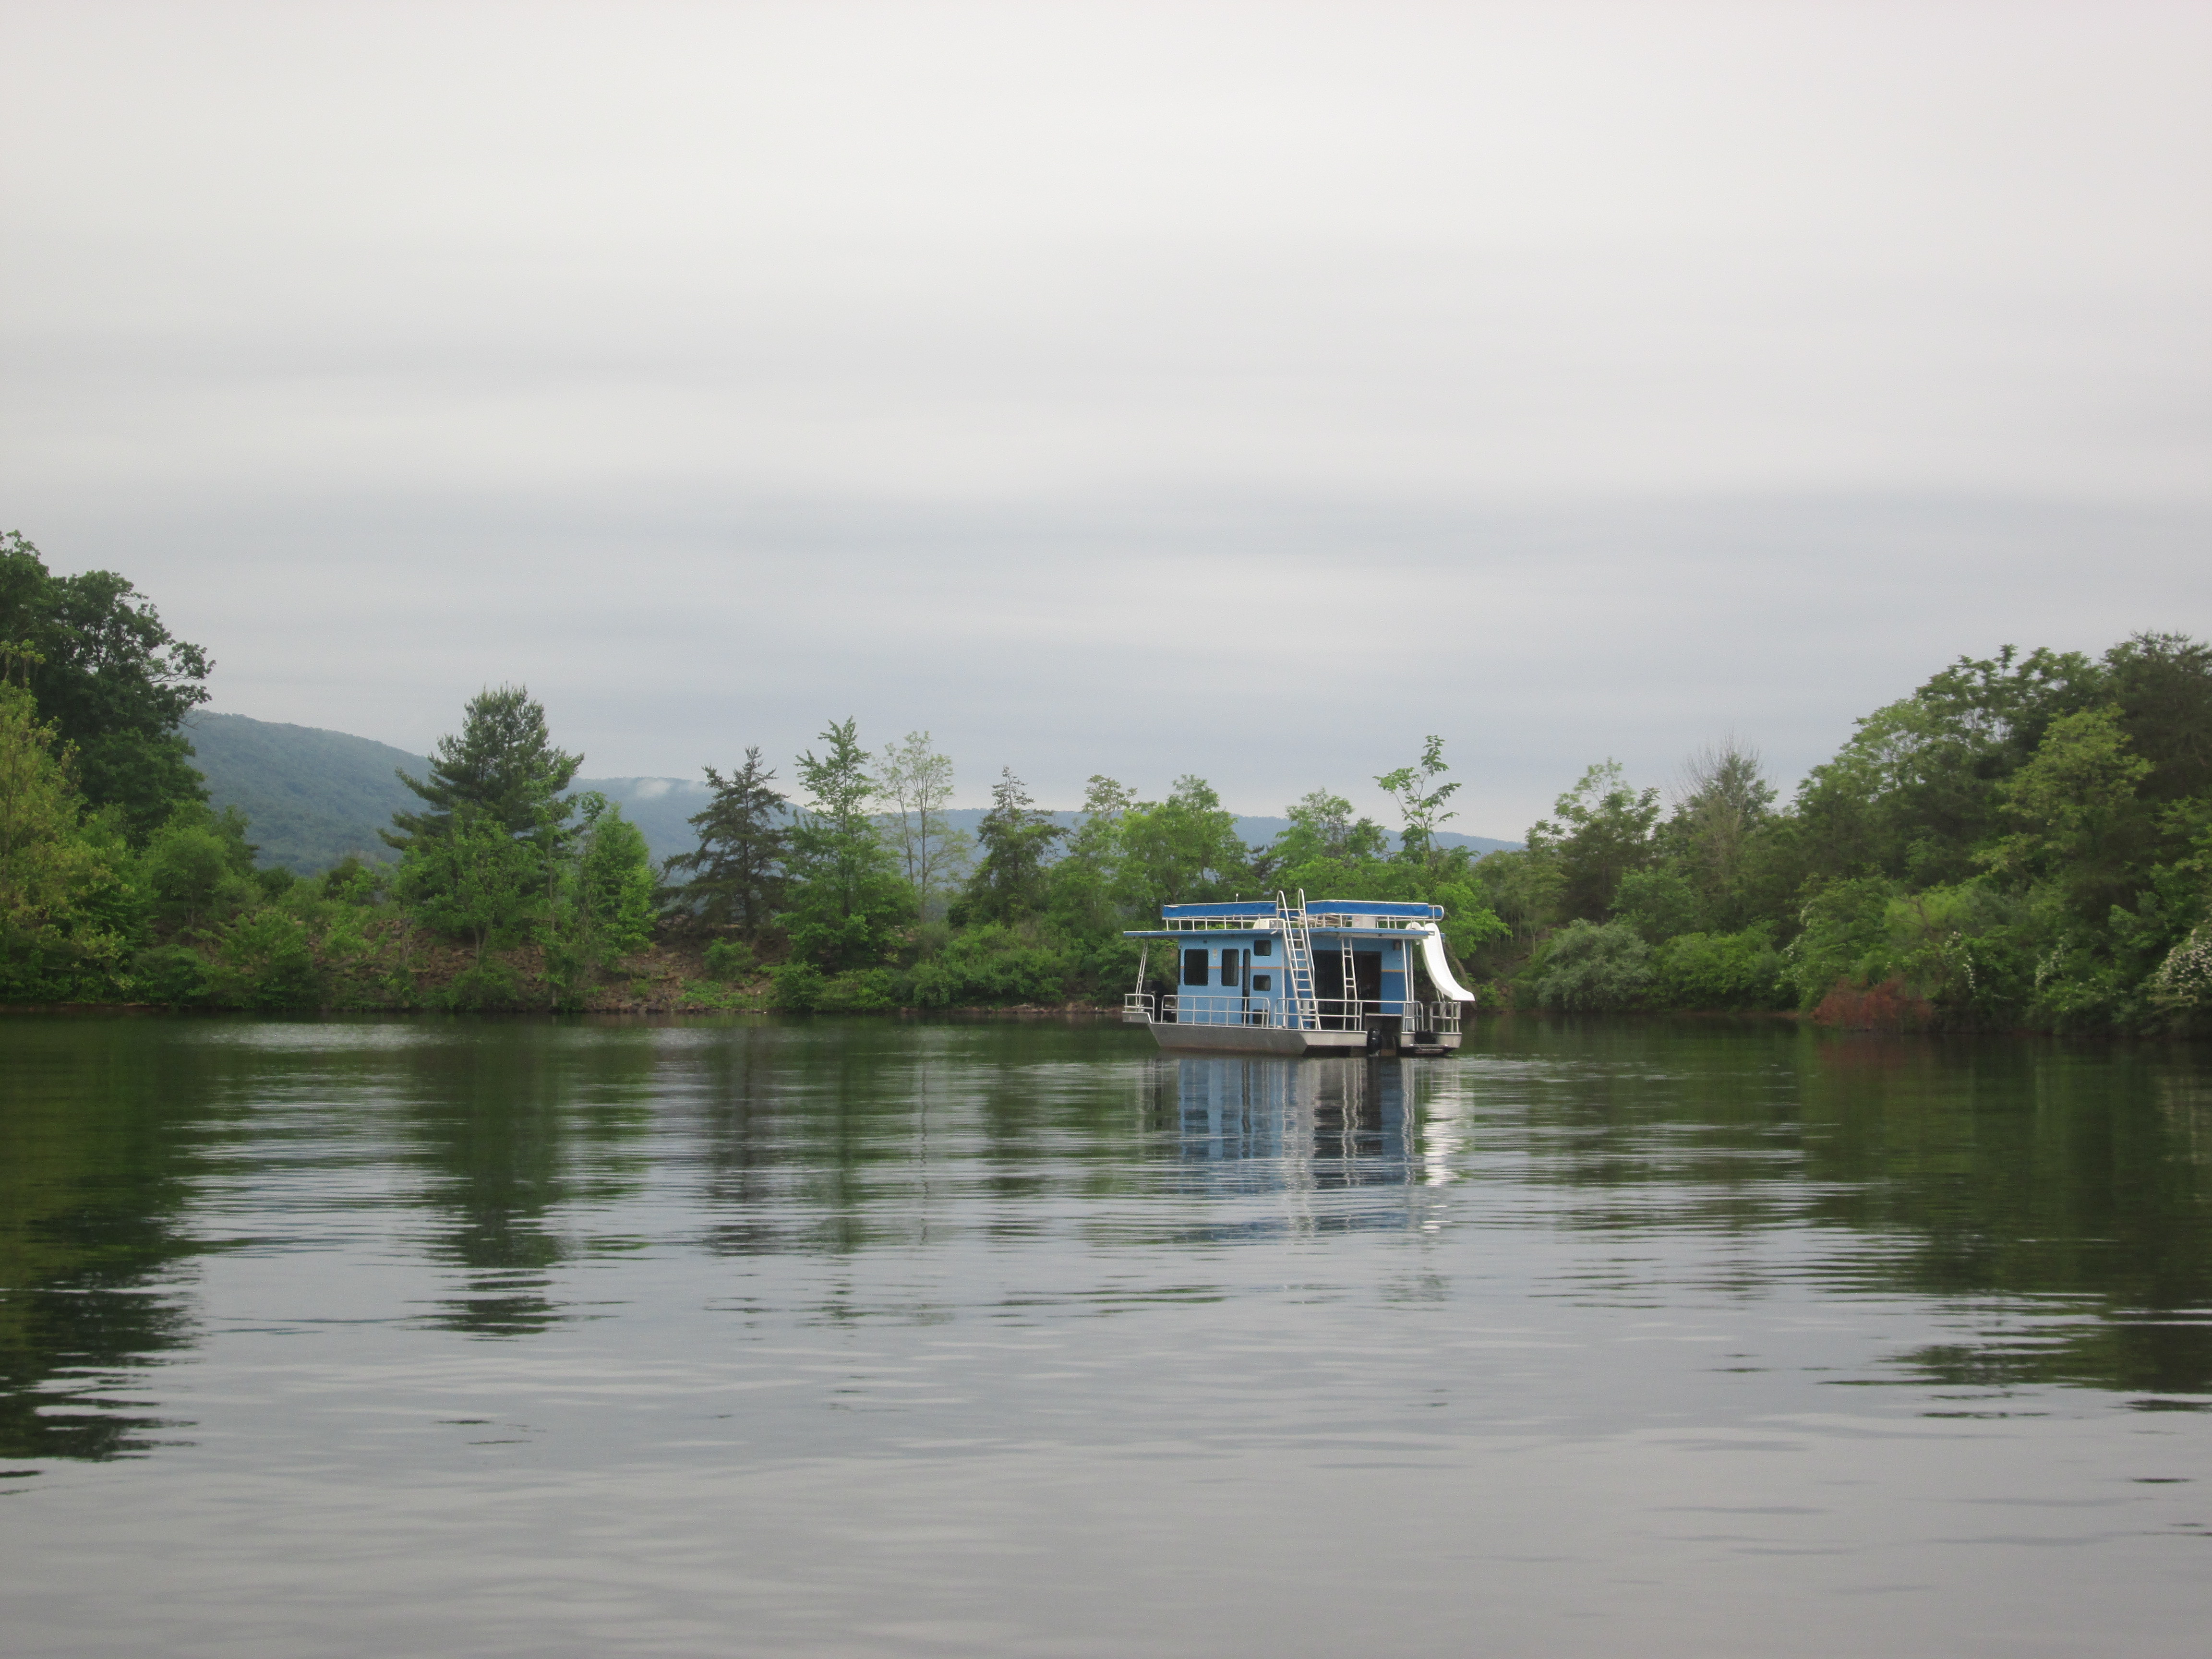 Houseboating in Raystown Lake, PA - Jersey Kids